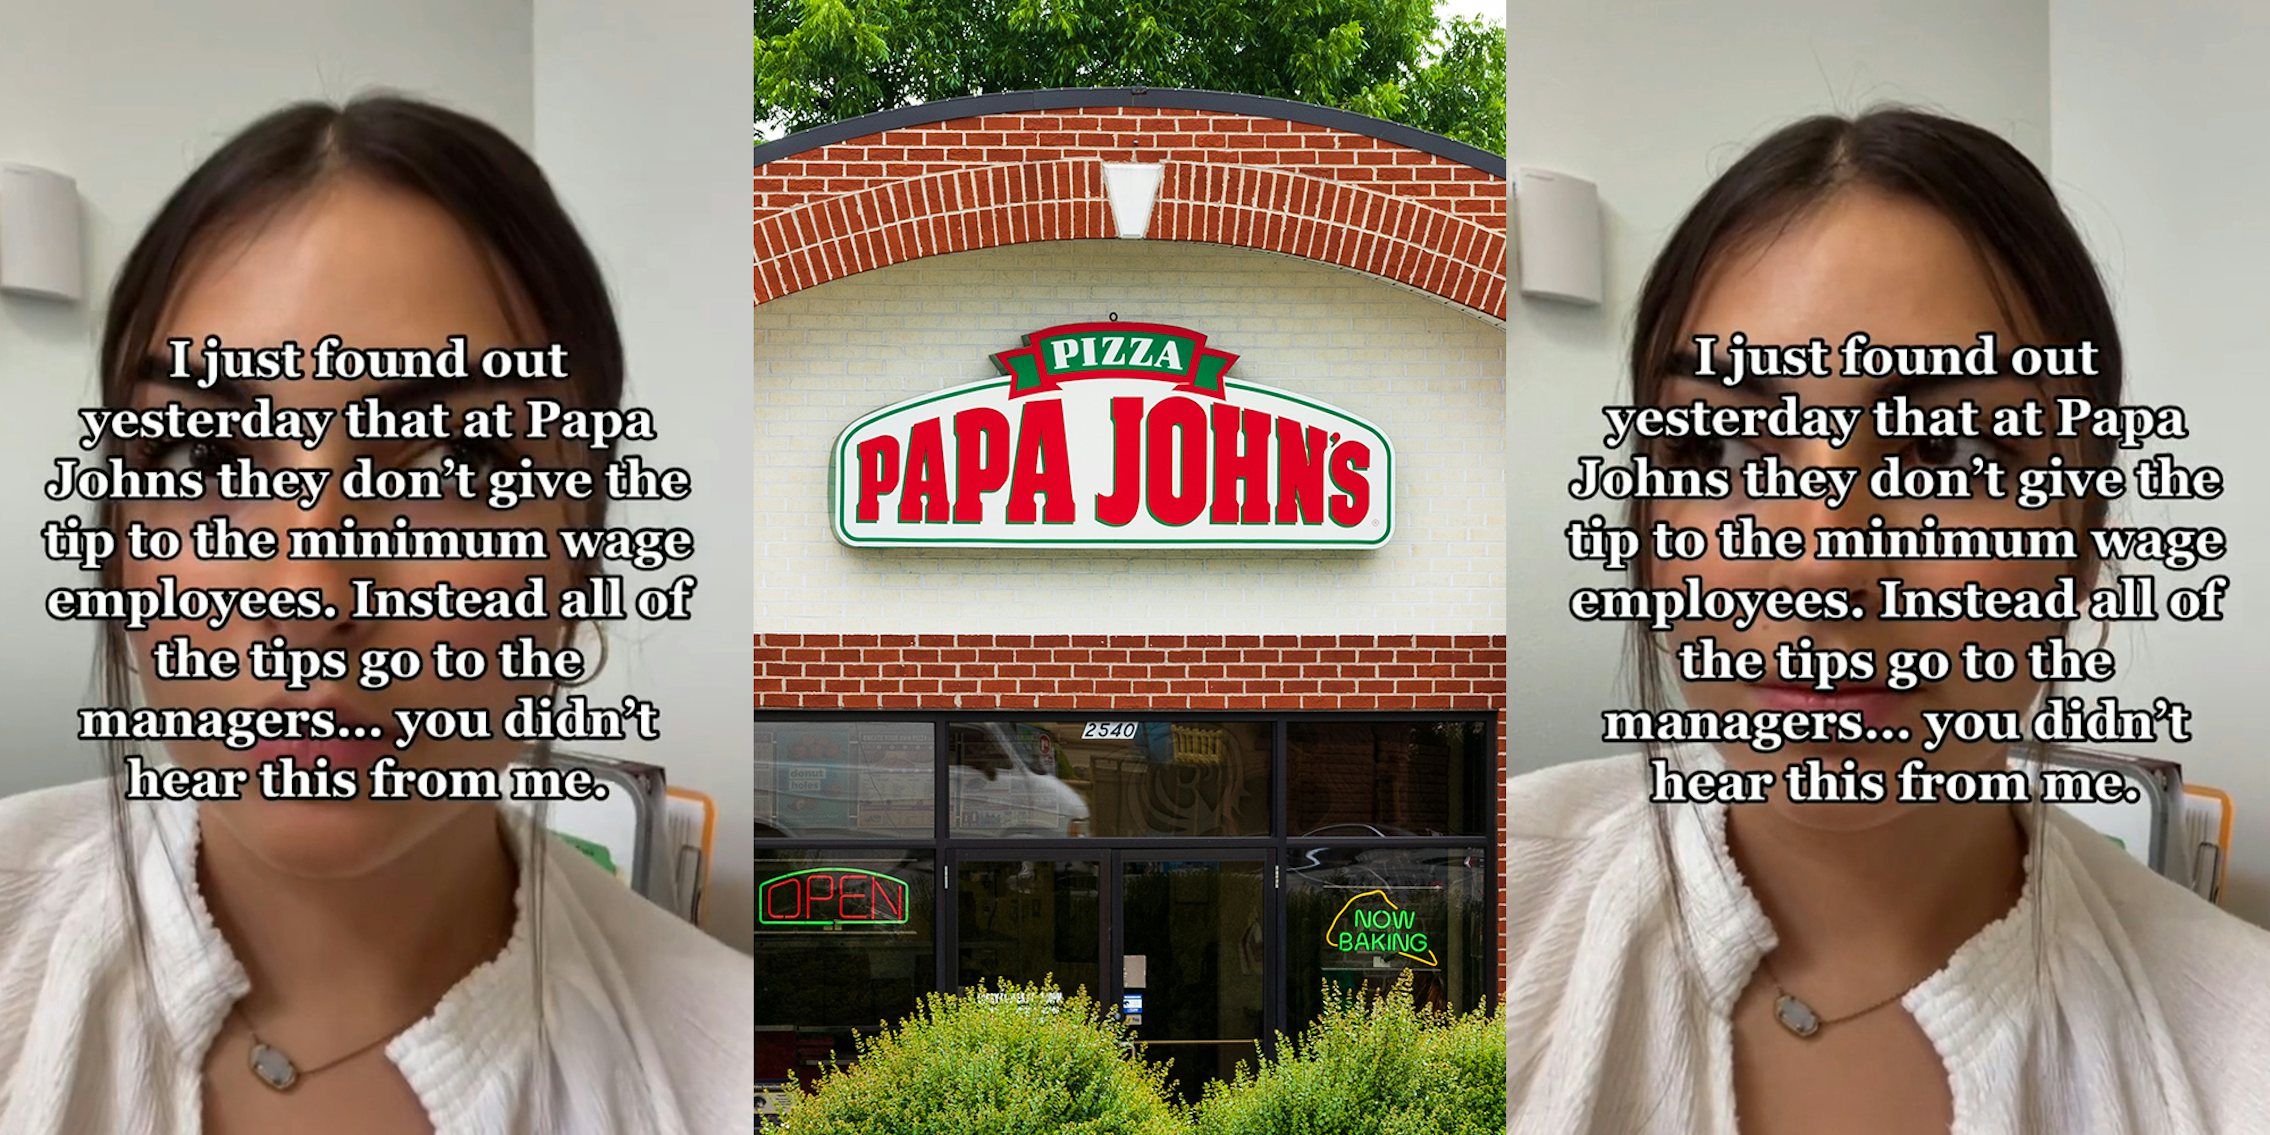 Papa John’s customer claims workers don’t get share of tips—they go to managers.